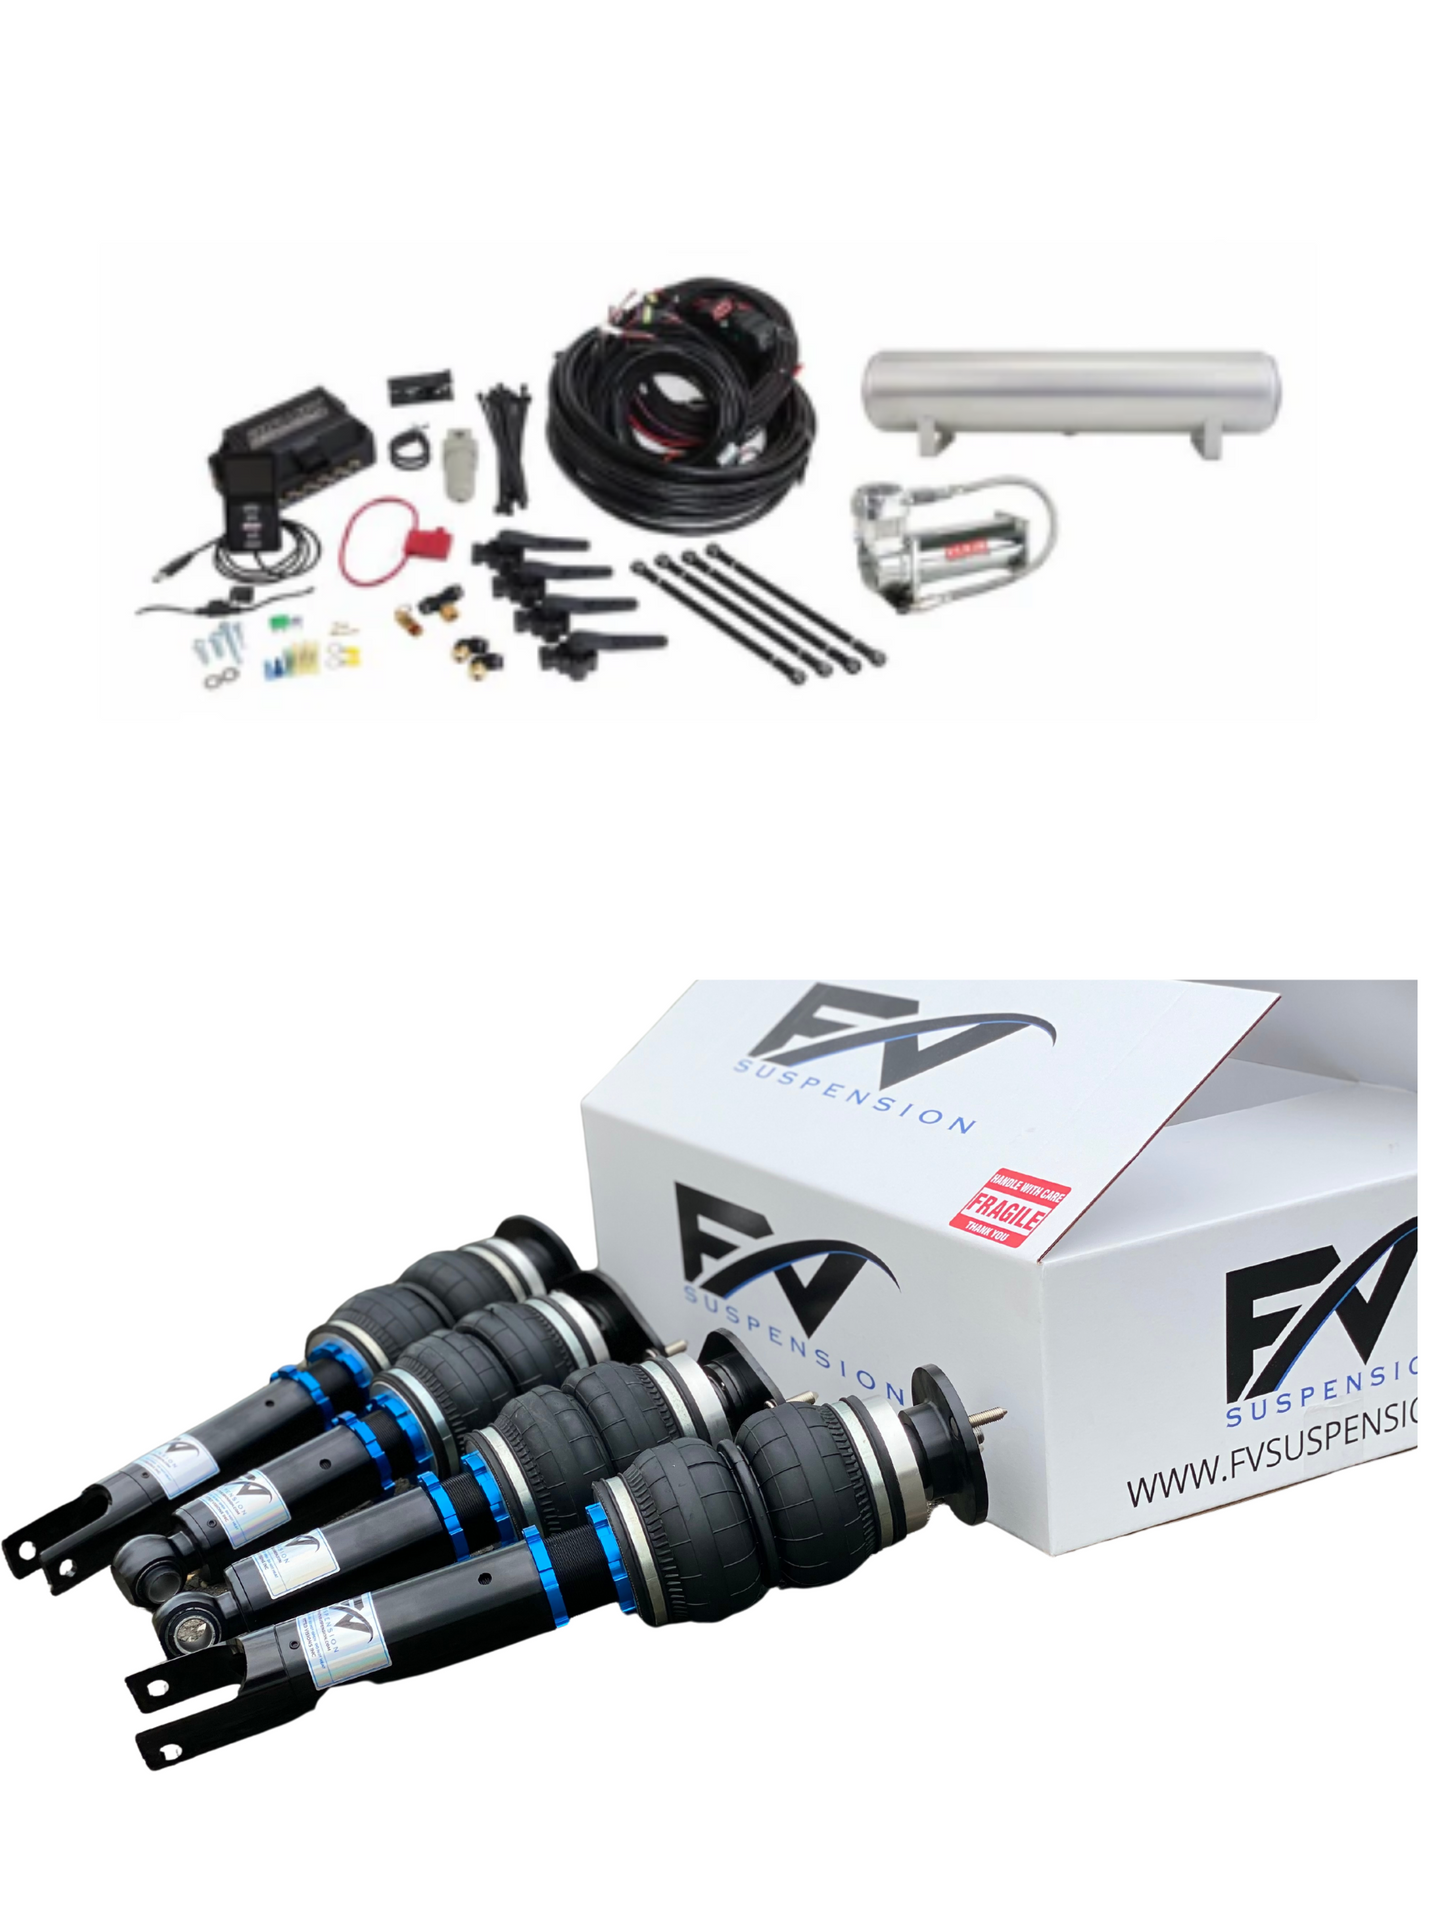 FV Suspension 3H Tier 3 Complete Air Ride kit for 2014+ BMW 2 Series-Convertible - FVALtier3kit131